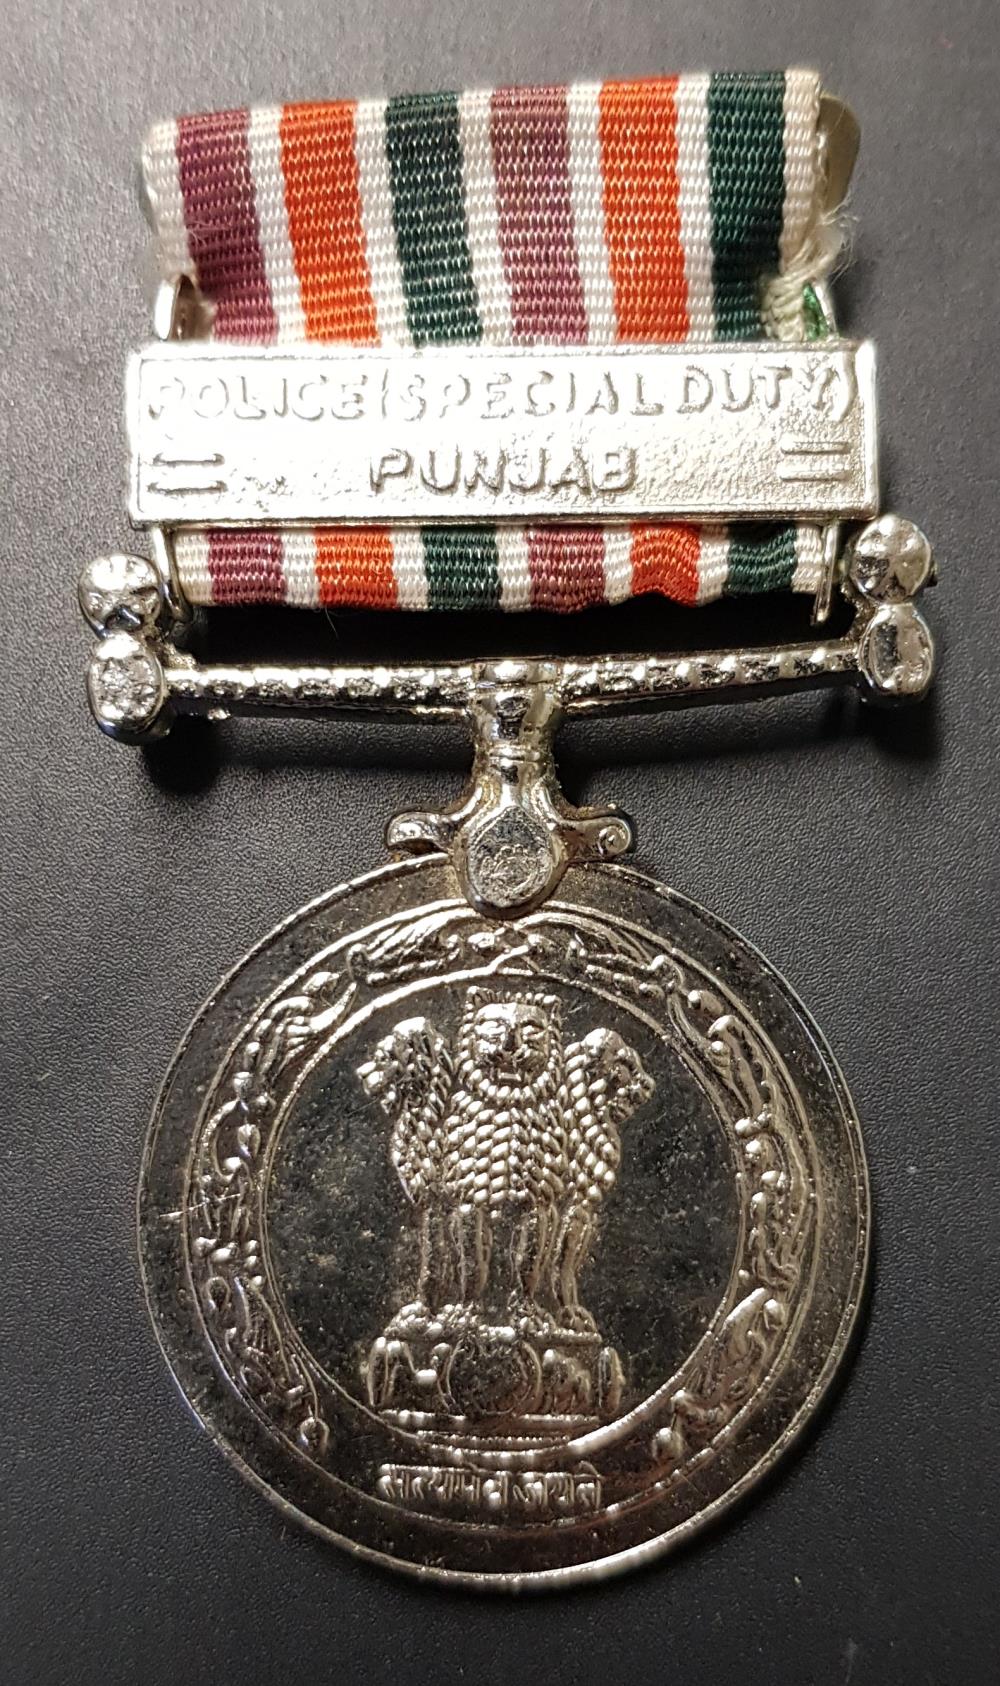 Worcestershire Medal Service: India: Police Special Duty Medal clasp Punjab